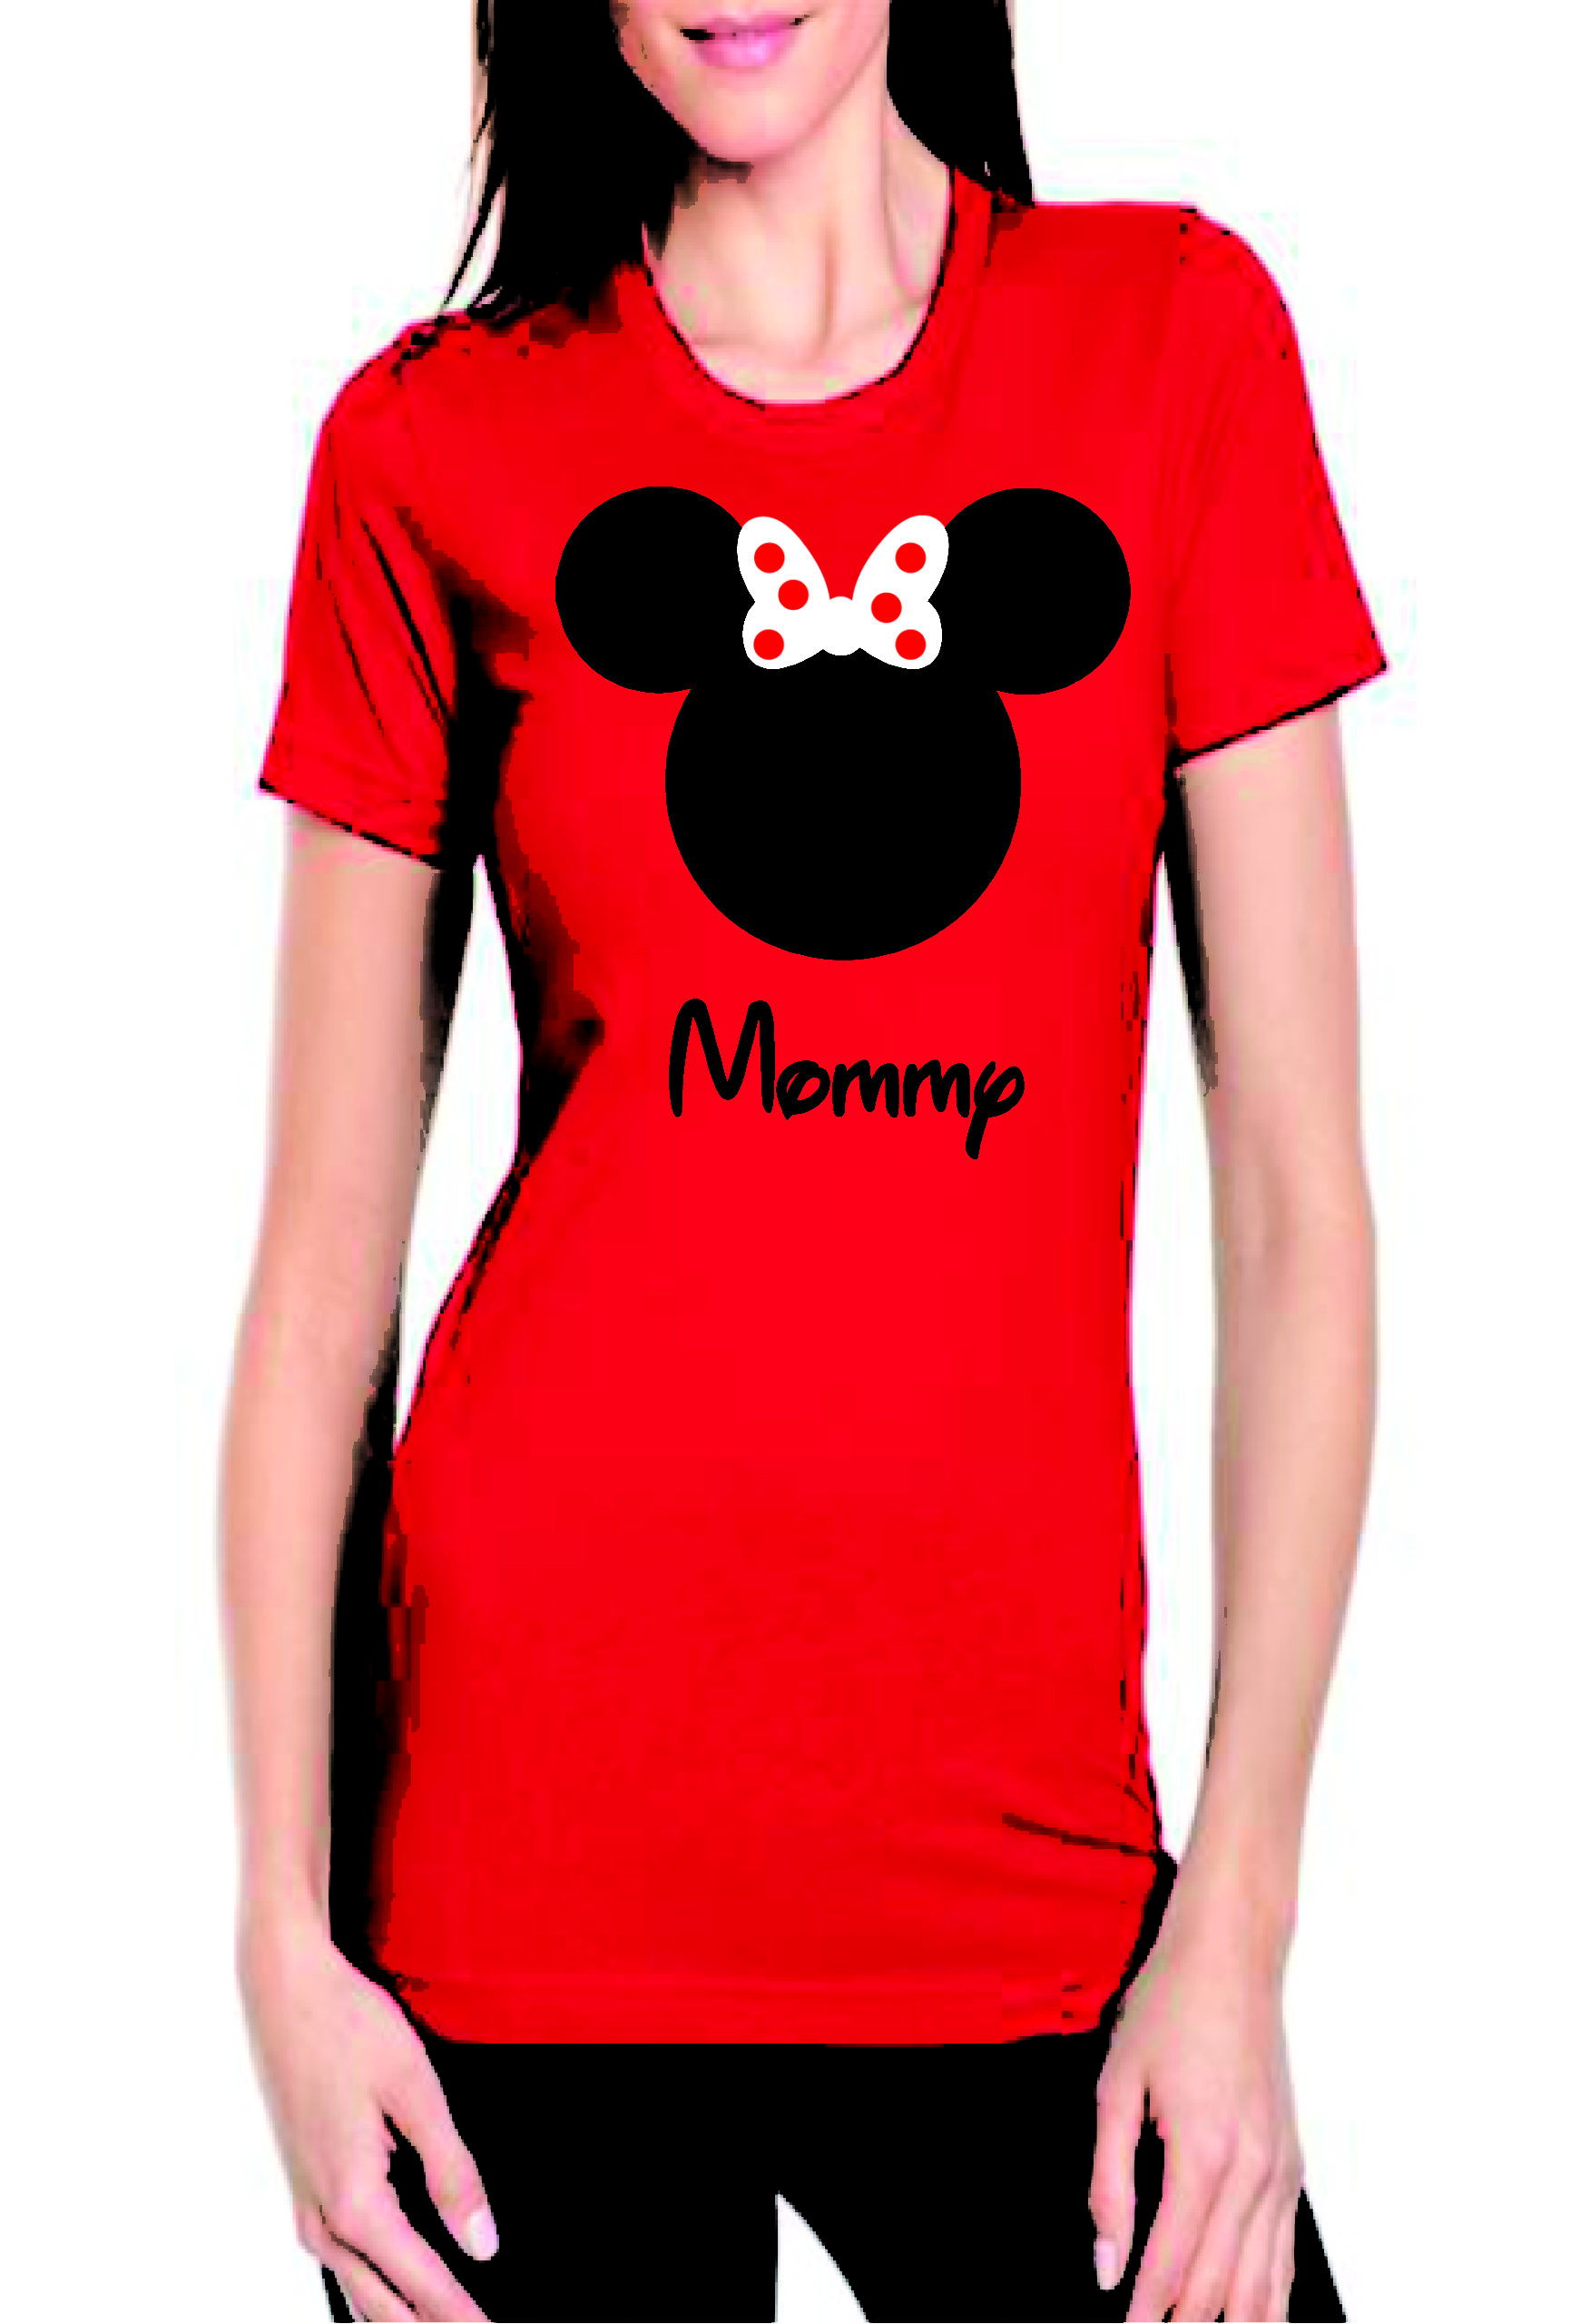 Disney Shirts Stares Group TShirt Printing and Embroidery